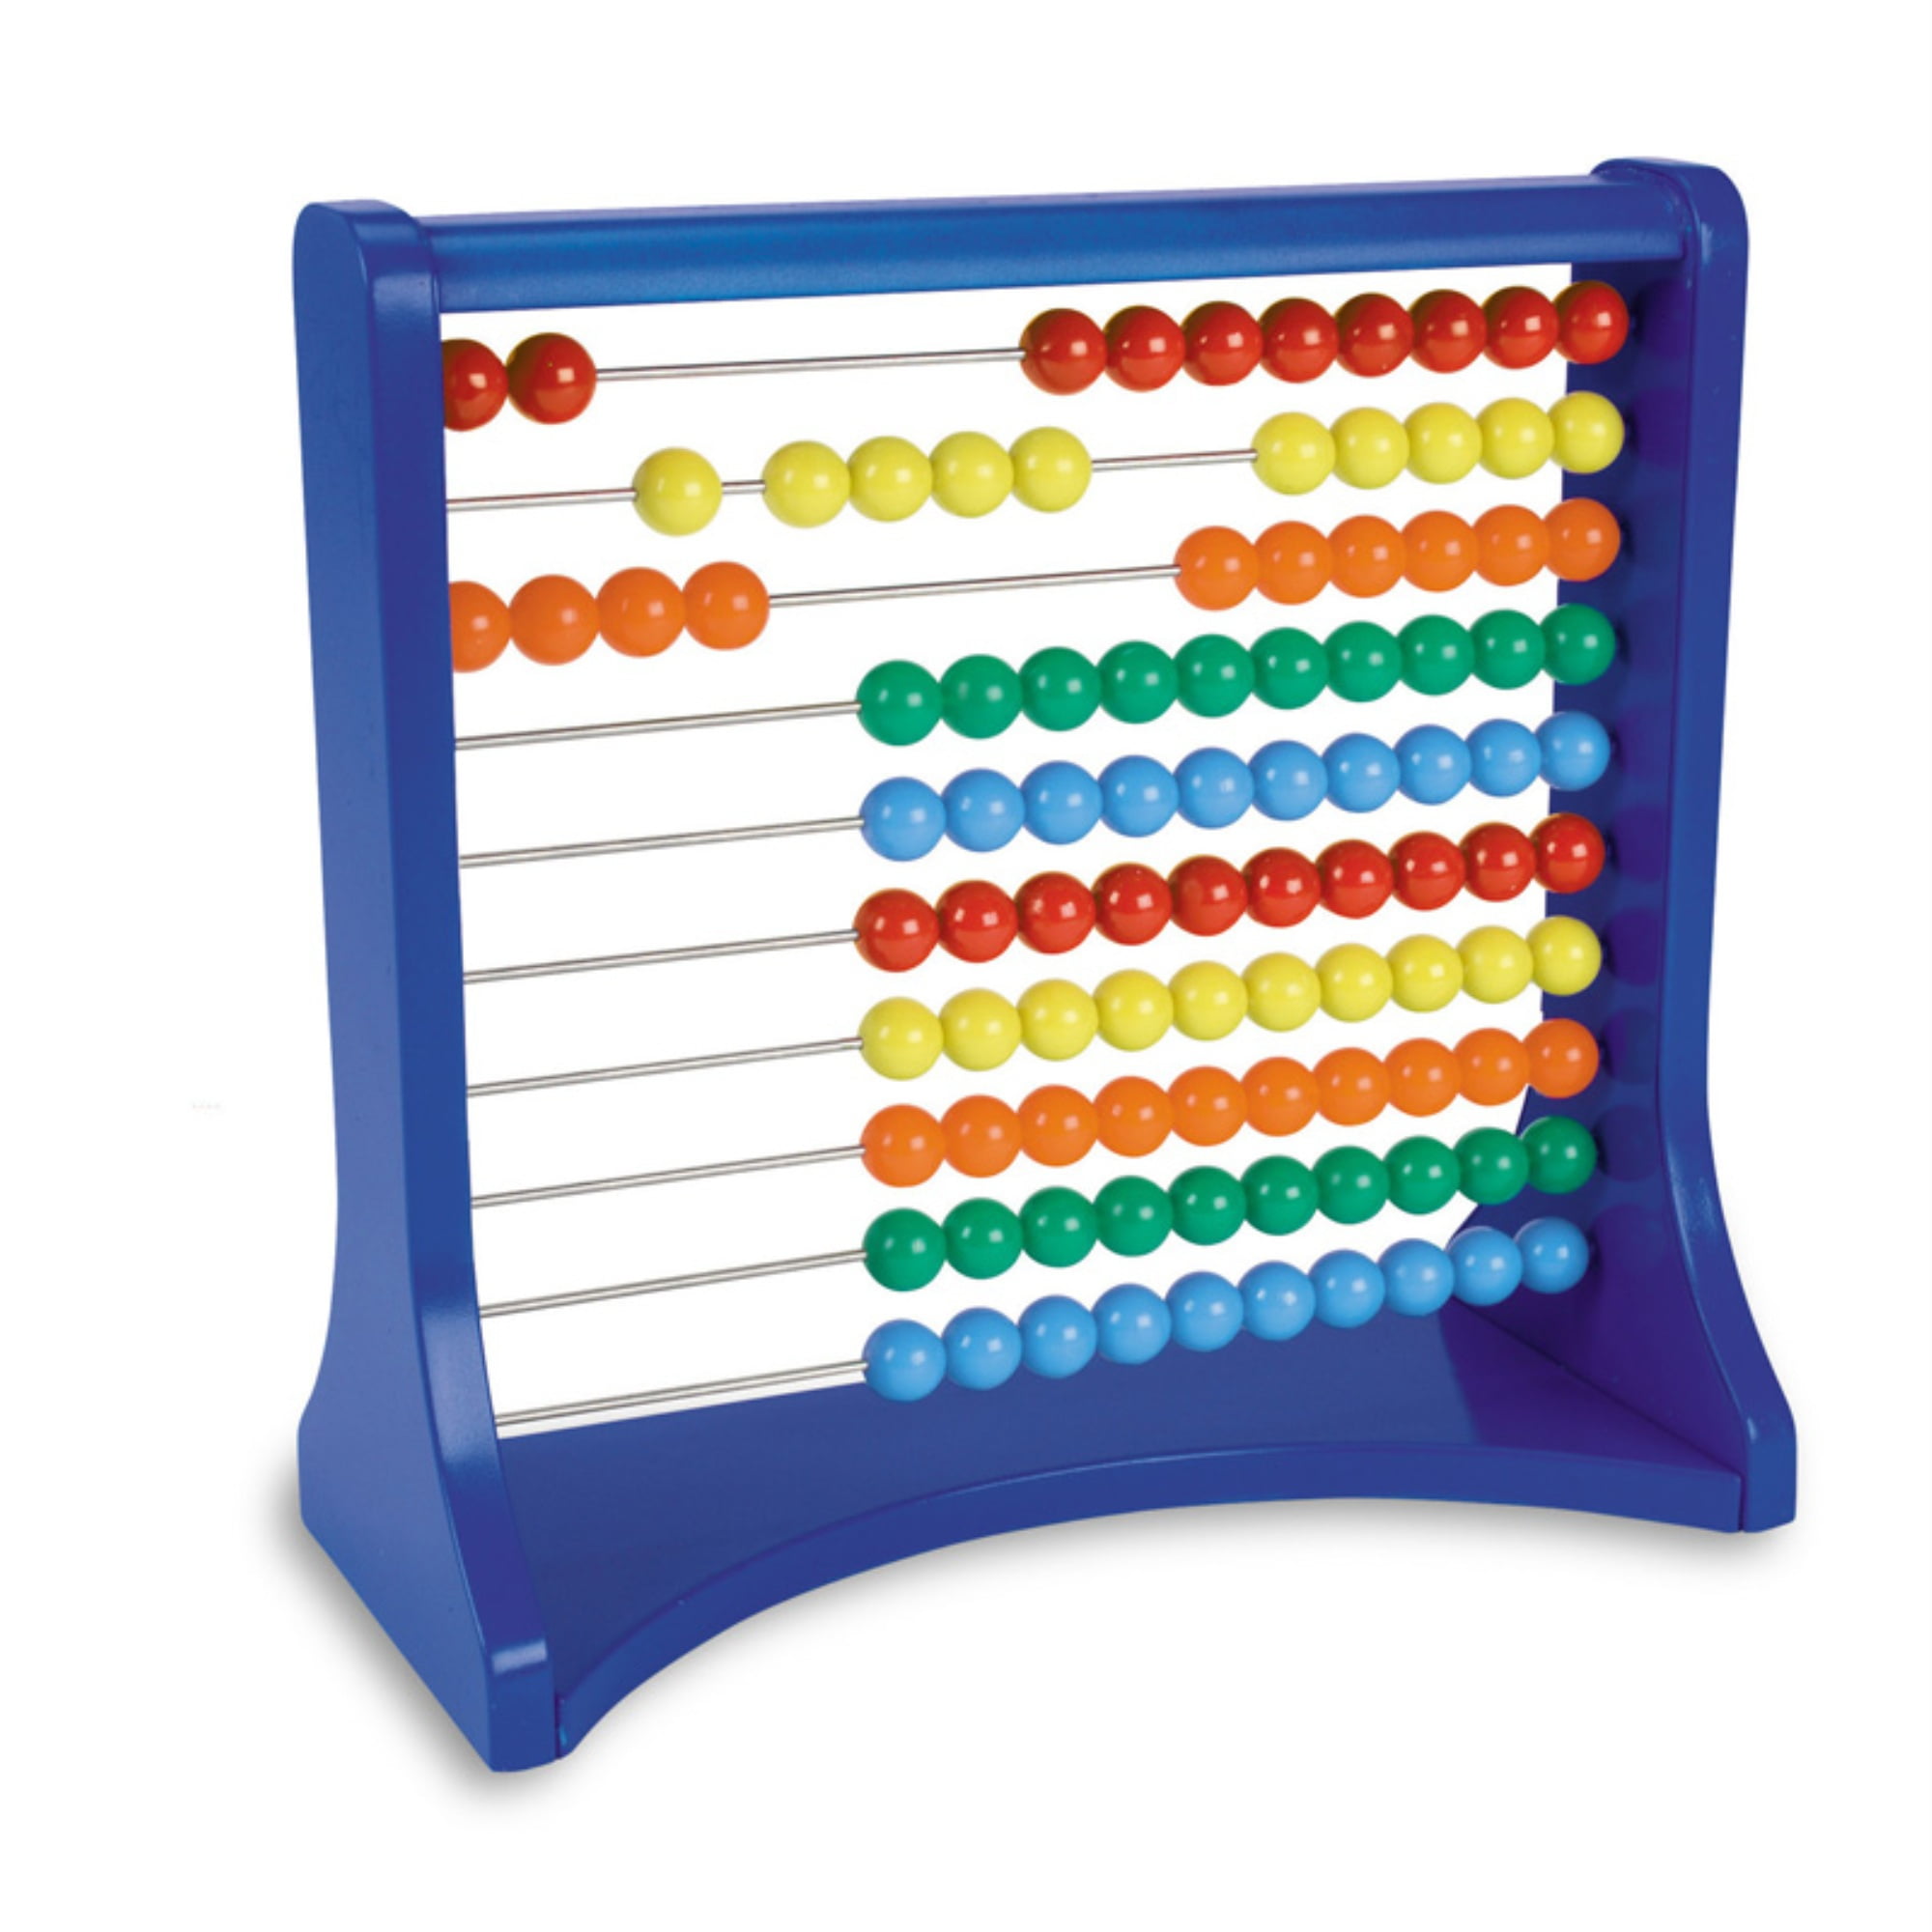 50 Beads and 30 Block Abacus Study Blocks Wood Promote Learning Calculations 